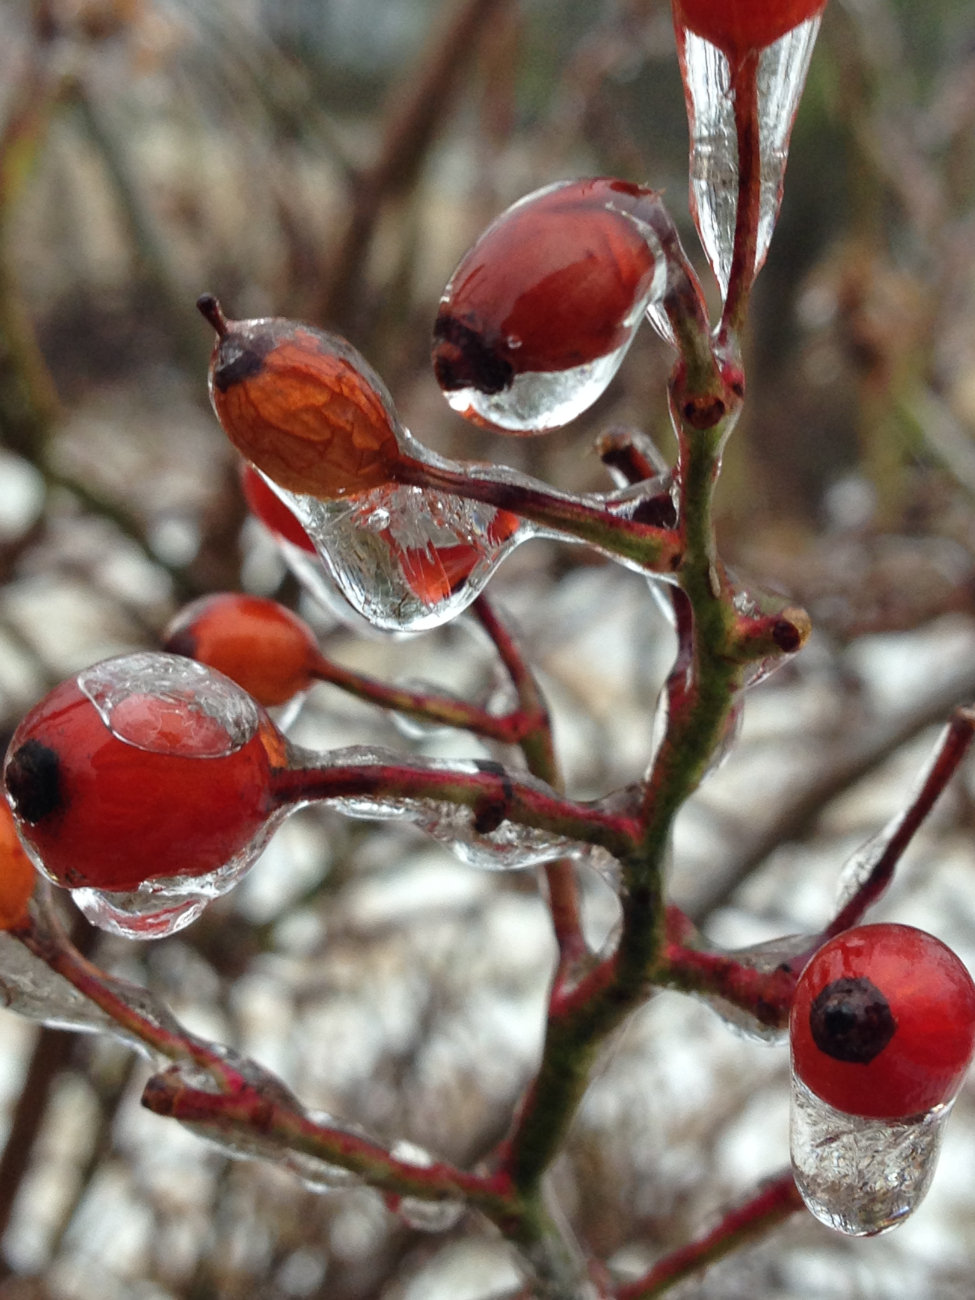 Water freezes onto berries after an ice storm, encapsulating their colorfulbeauty